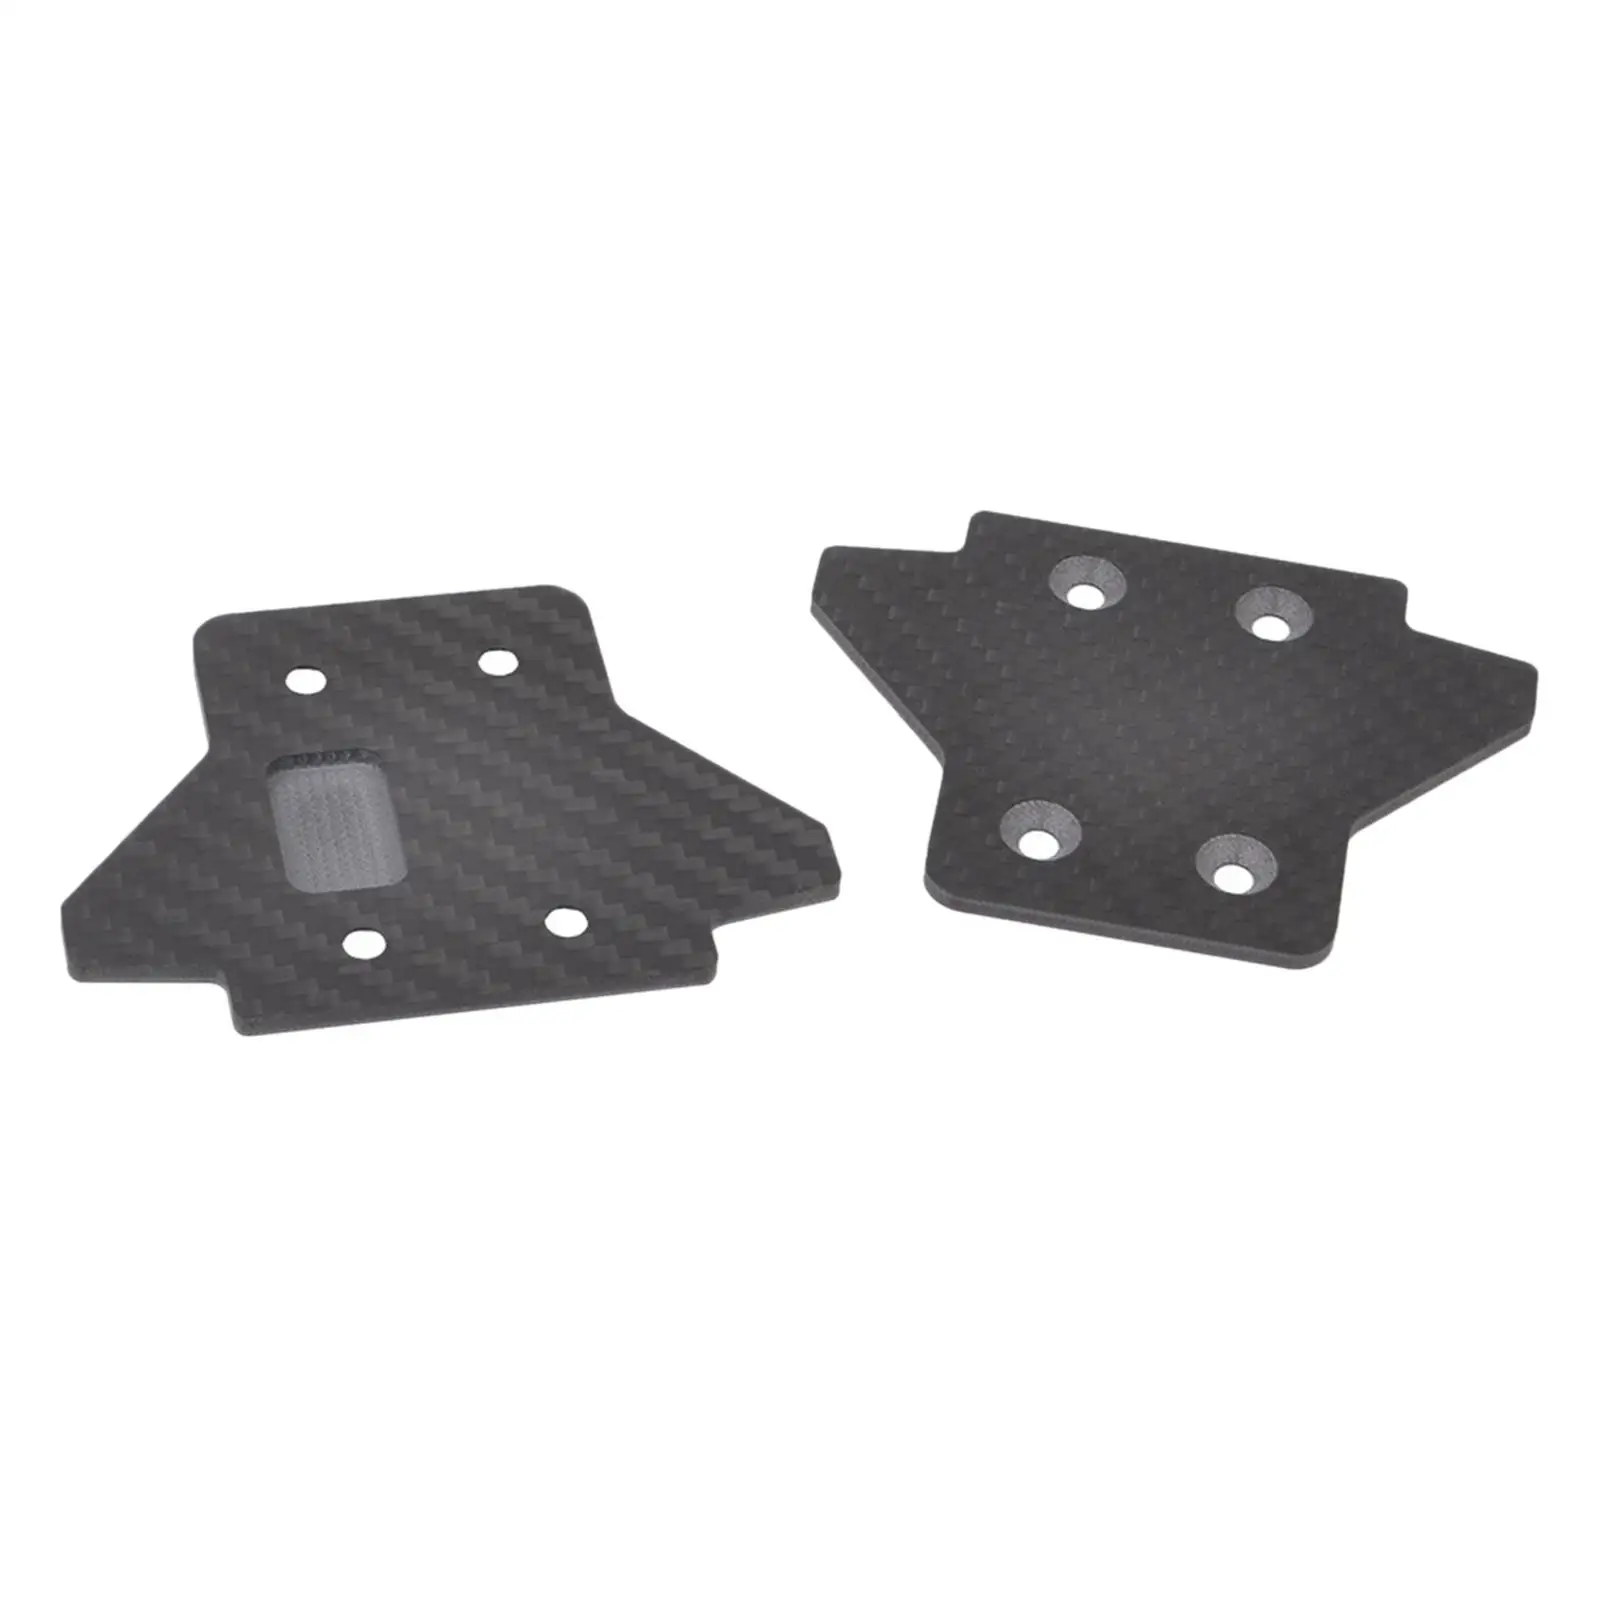 1/8 Chassis Armor Protector Cover Protection Cover Chassis Armor Guard Front Rear Replace Parts for Arrma RC Model Buggy